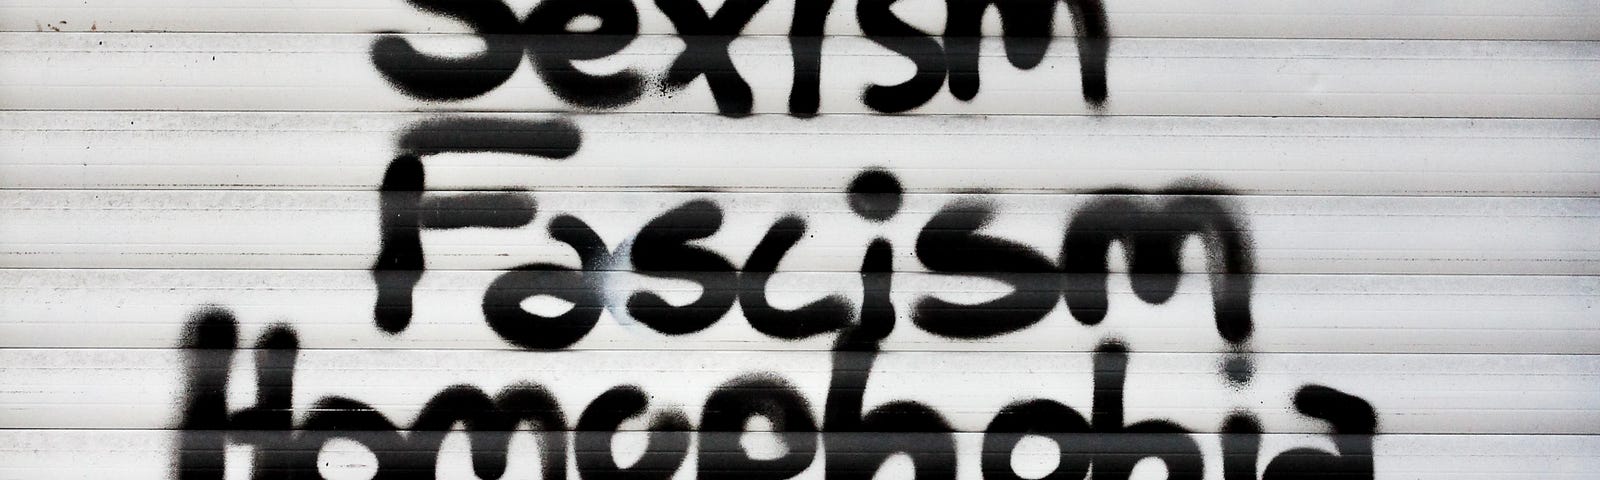 Graffiti spray painted onto a wall. “No place for: Racism, sexism, fascism, homophobia, transphobia, fatphobia or hate!”